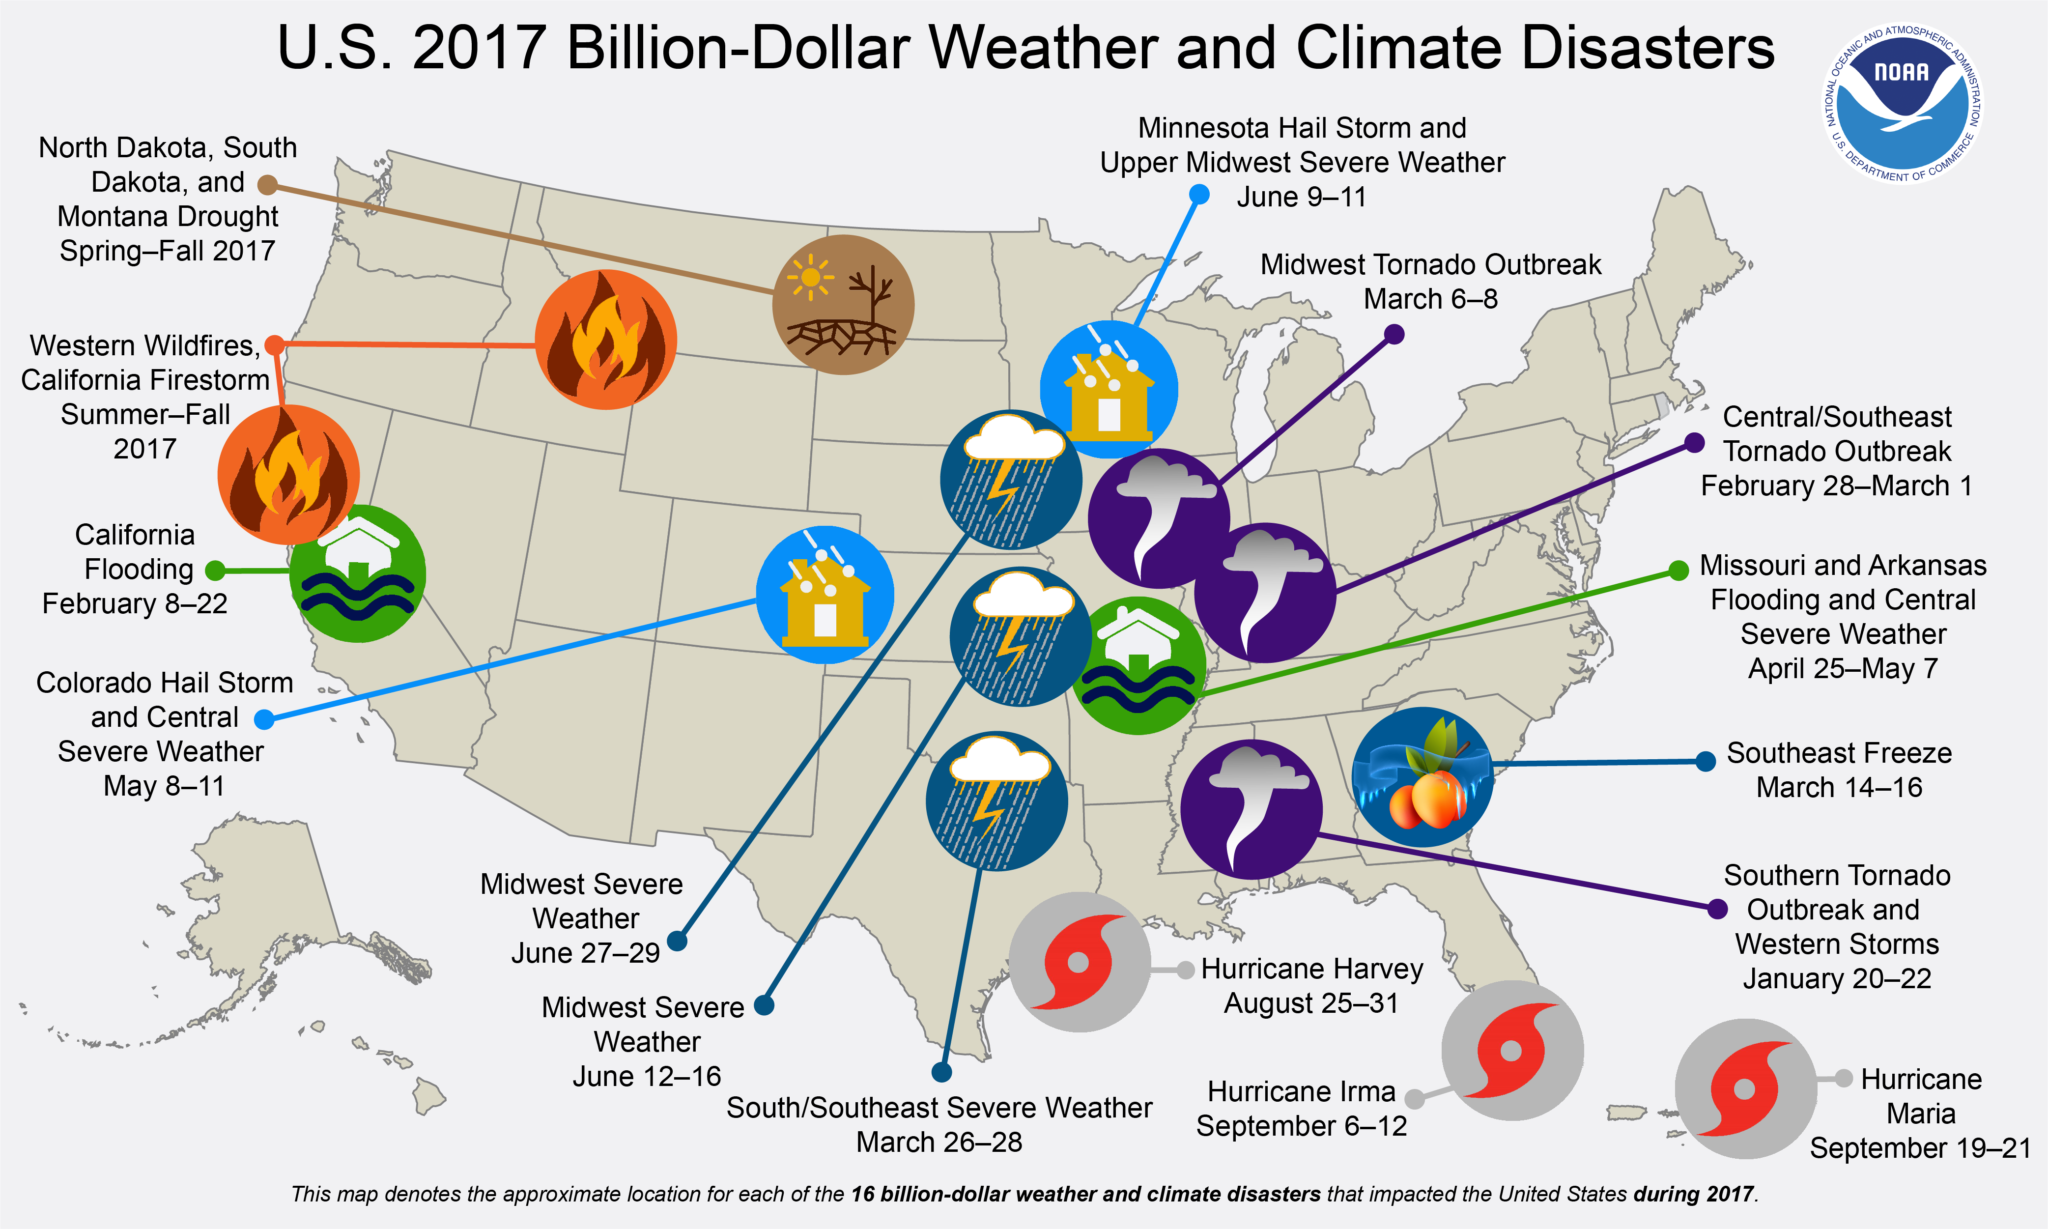 THE NATIONAL OCEANIC AND ATMOSPHERIC ADMINISTRATION reported that 2017 was the costliest year on record for weather and climate disasters. / COURTESY NOAA